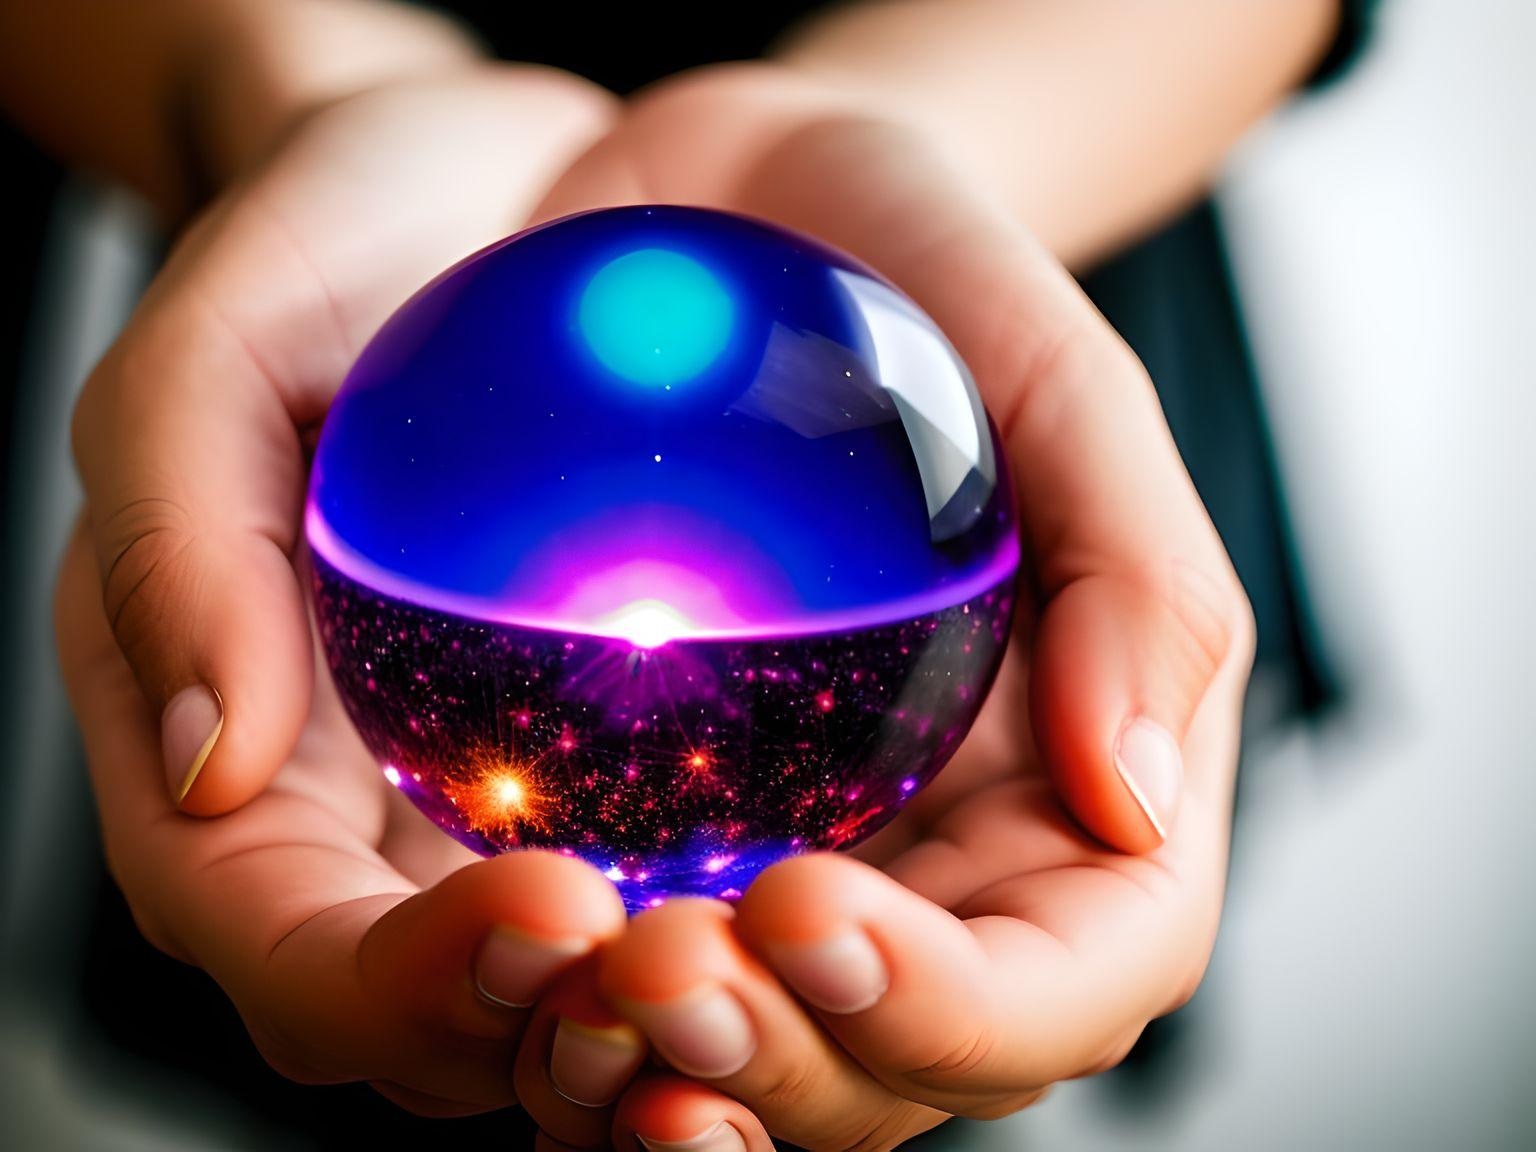 Hands holding a crystal ball, symbolizing the development of psychic abilities